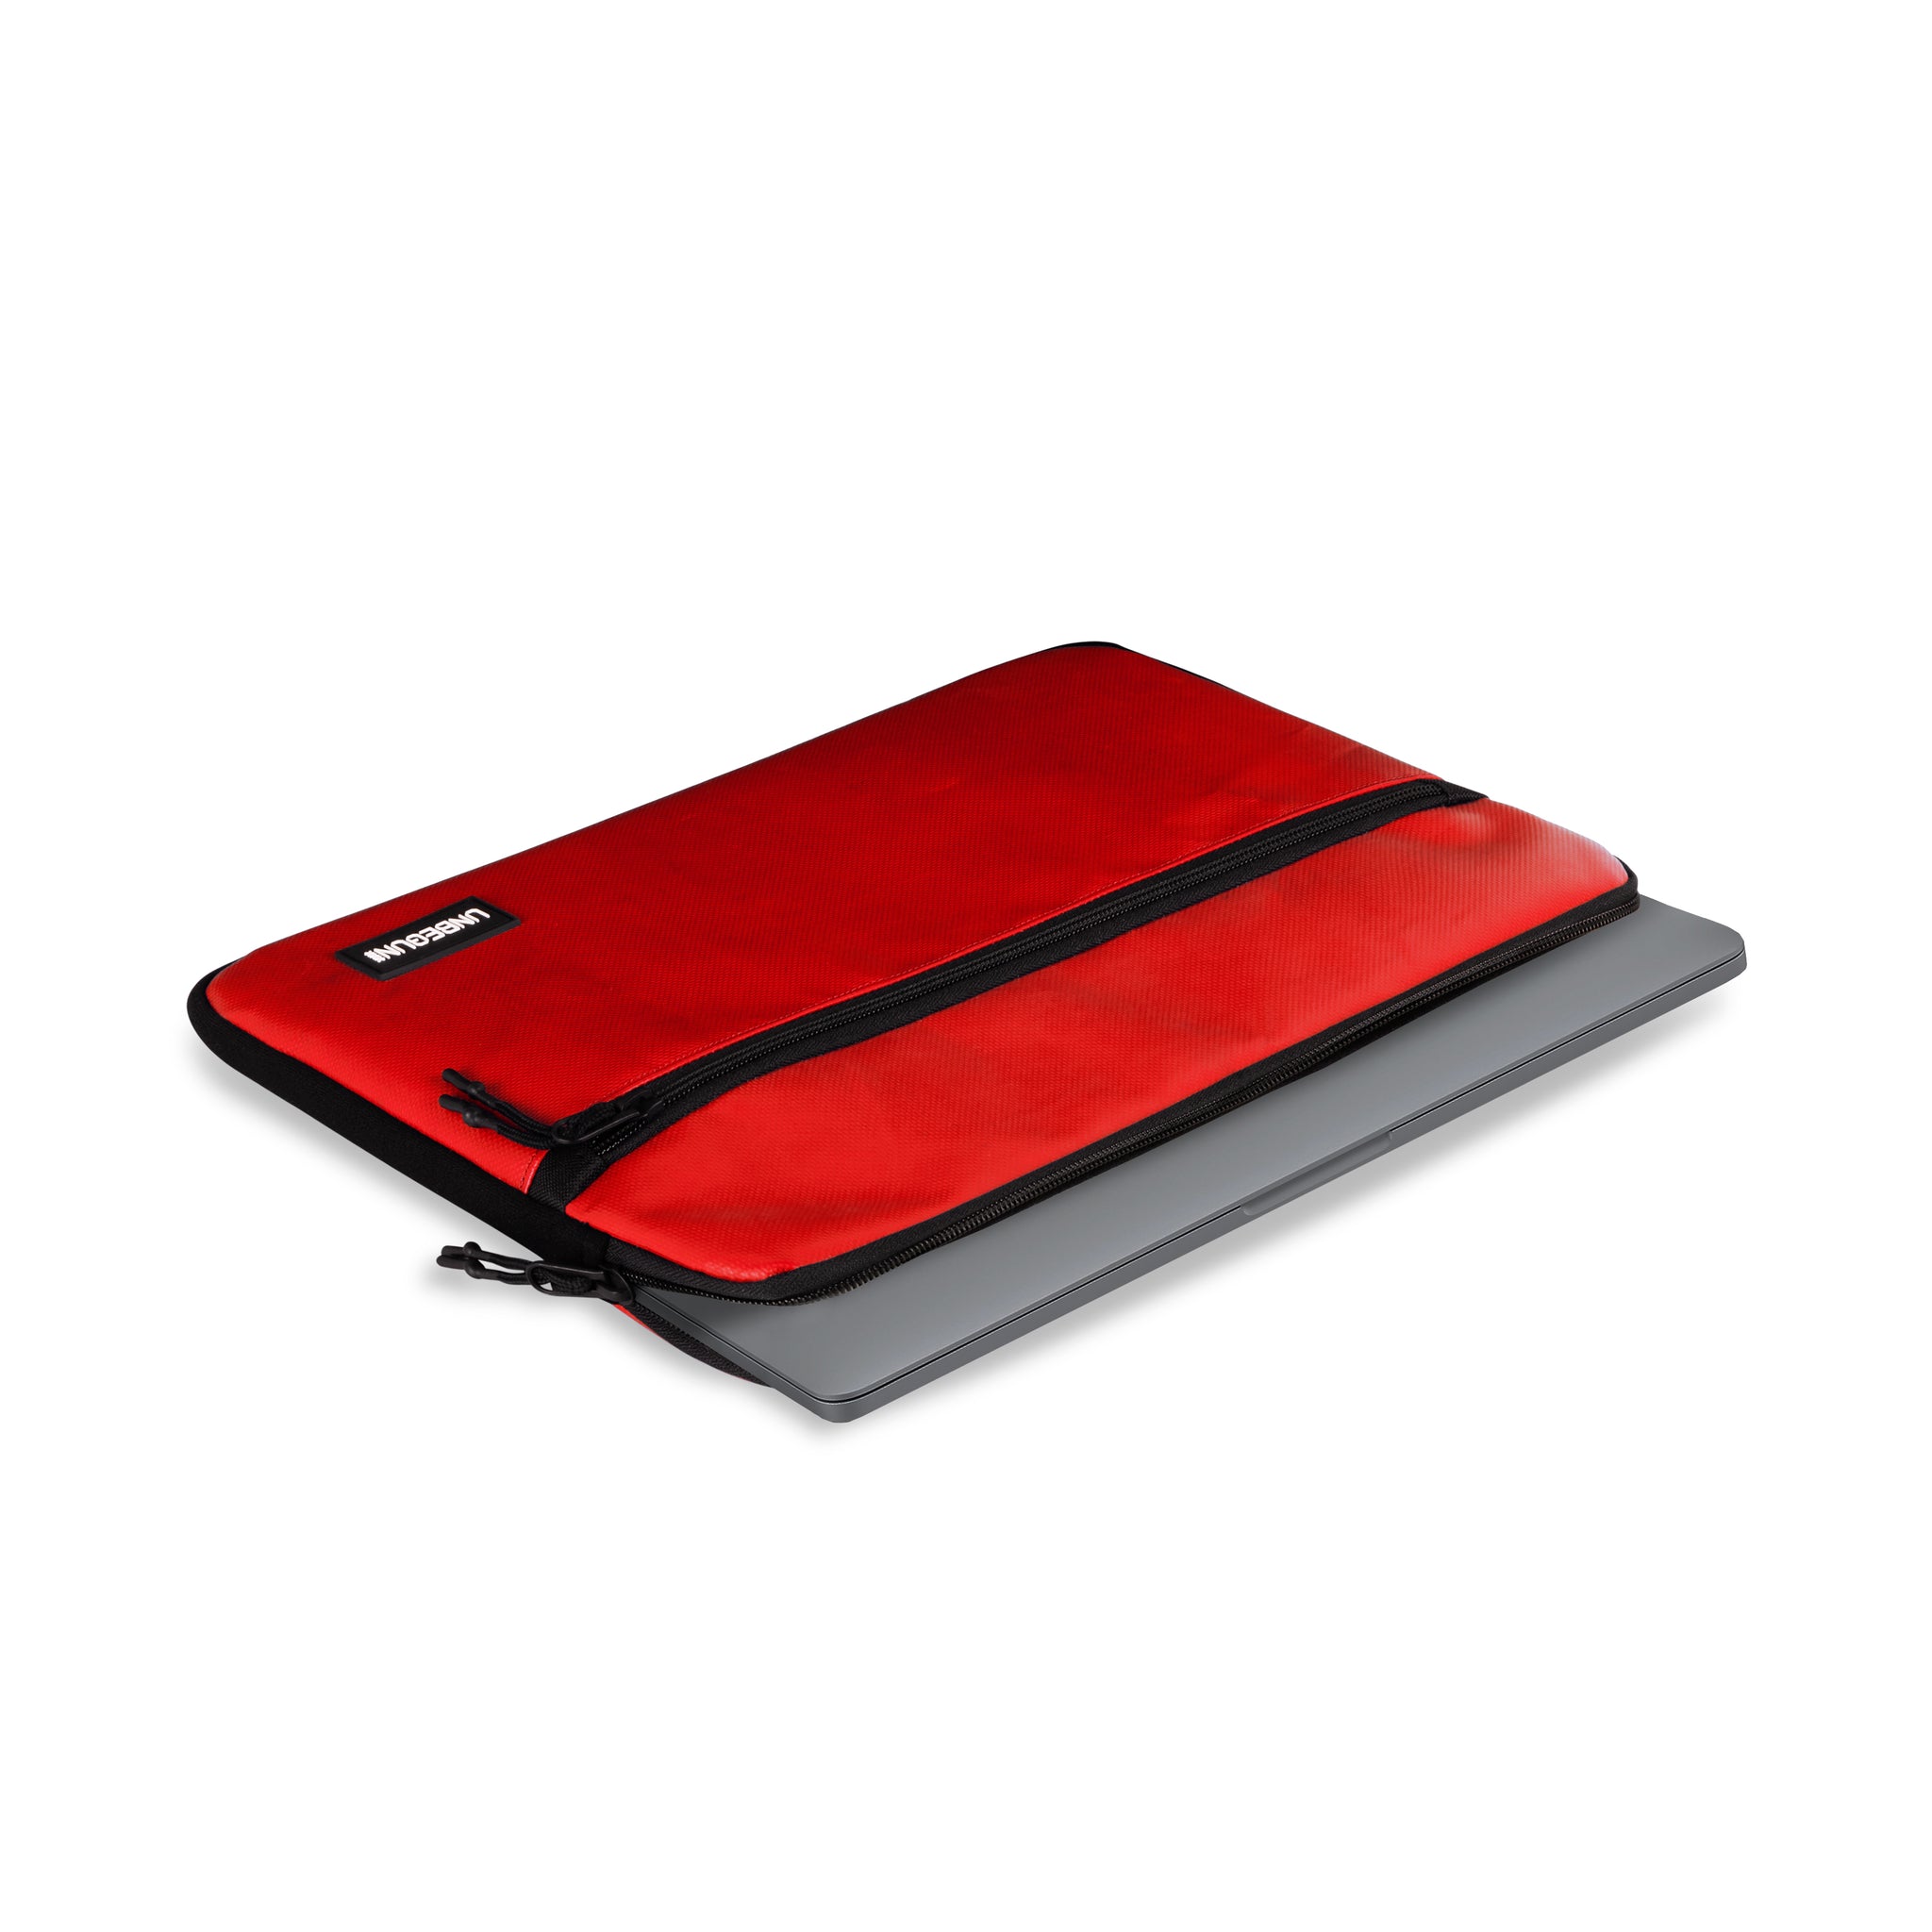 LAPTOP CASE WITH FRONT COMPARTMENT (RED)